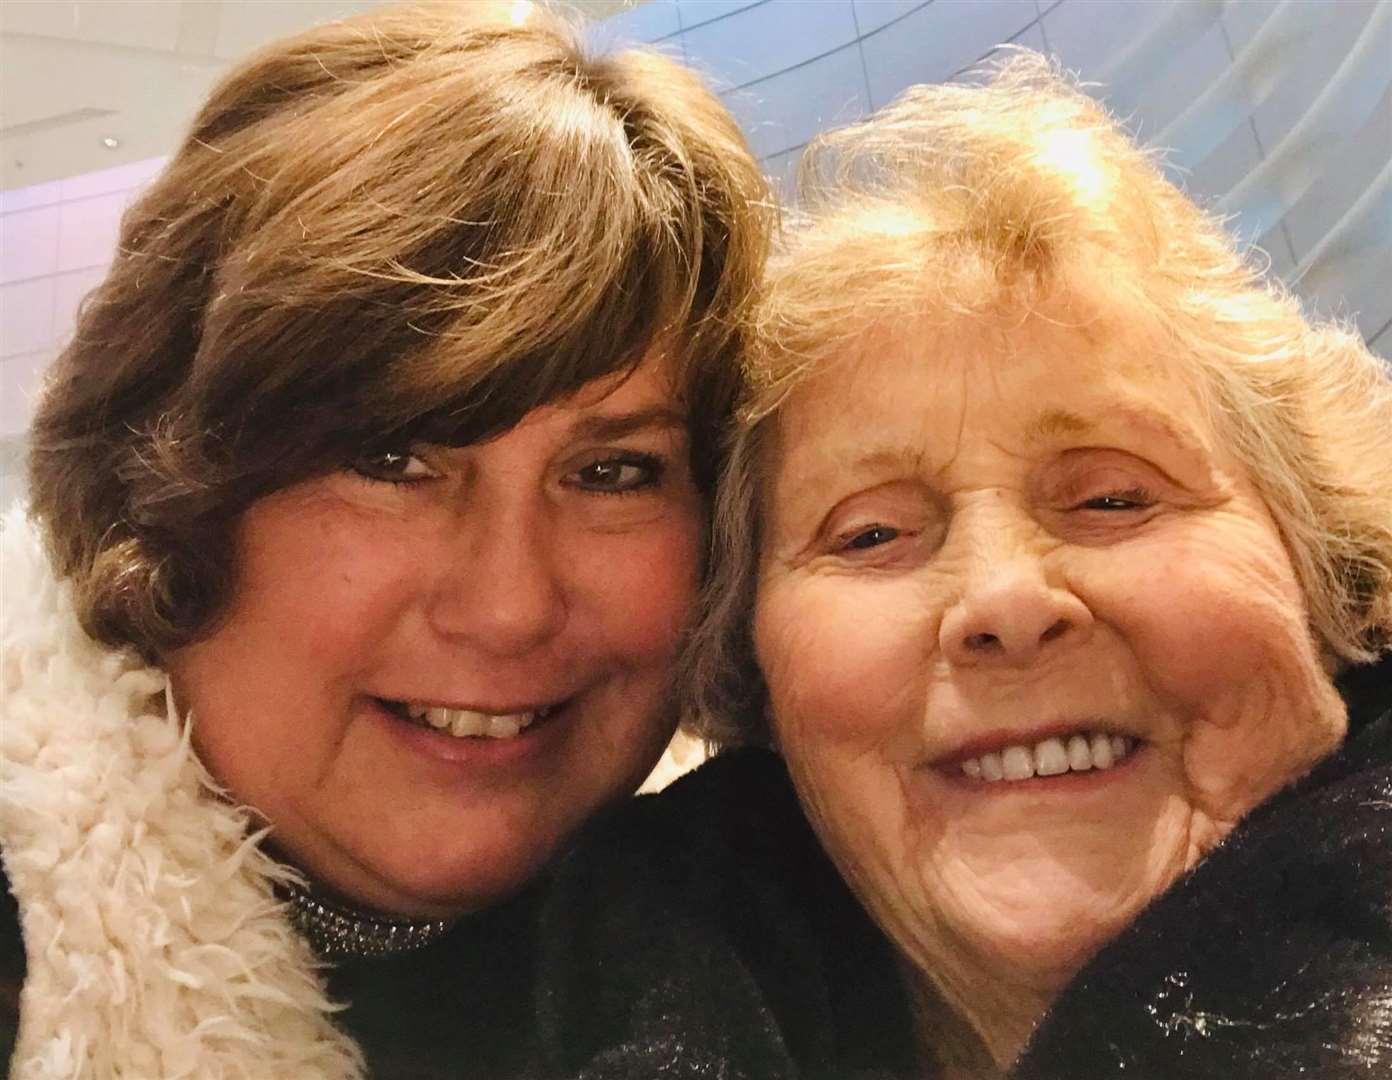 Jane Driscoll, from Sittingbourne, with her mum Rita who she had not seen for more than six months during the Covid-19 pandemic